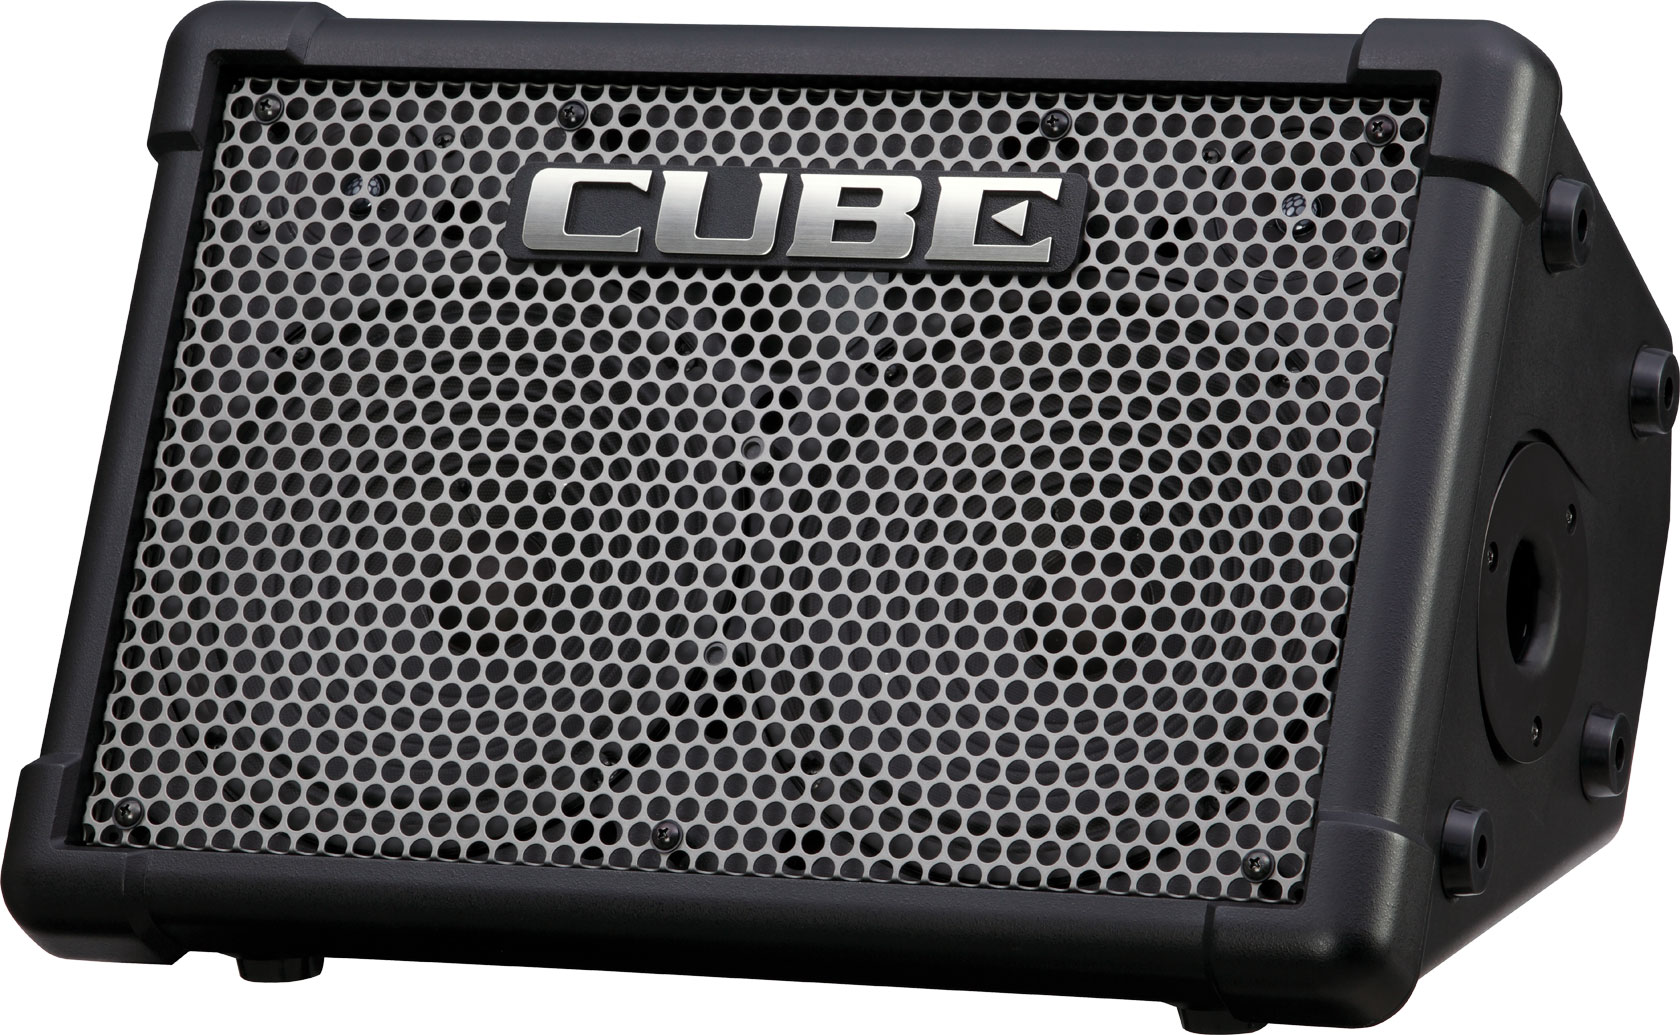 Roland - CUBE Street EX | Battery-Powered Stereo Amplifier